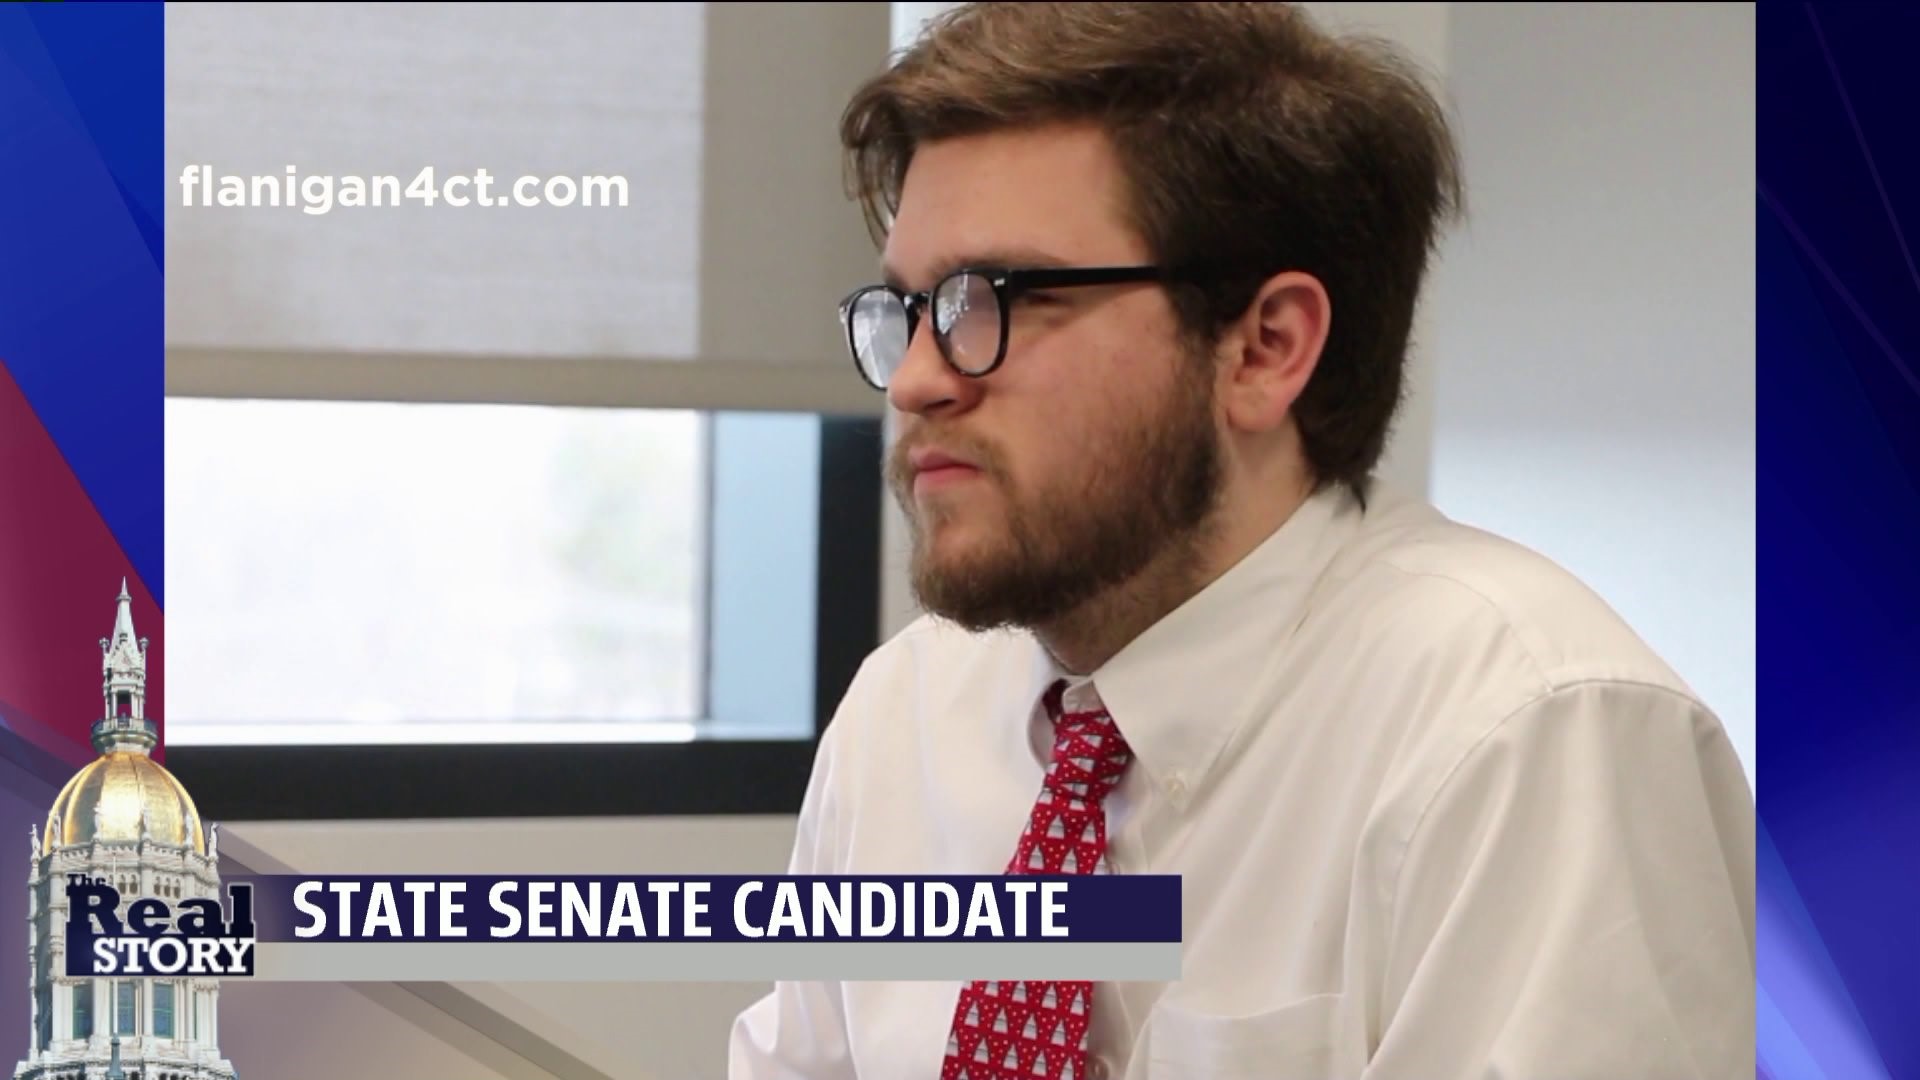 The Real Story - State Senate candidate